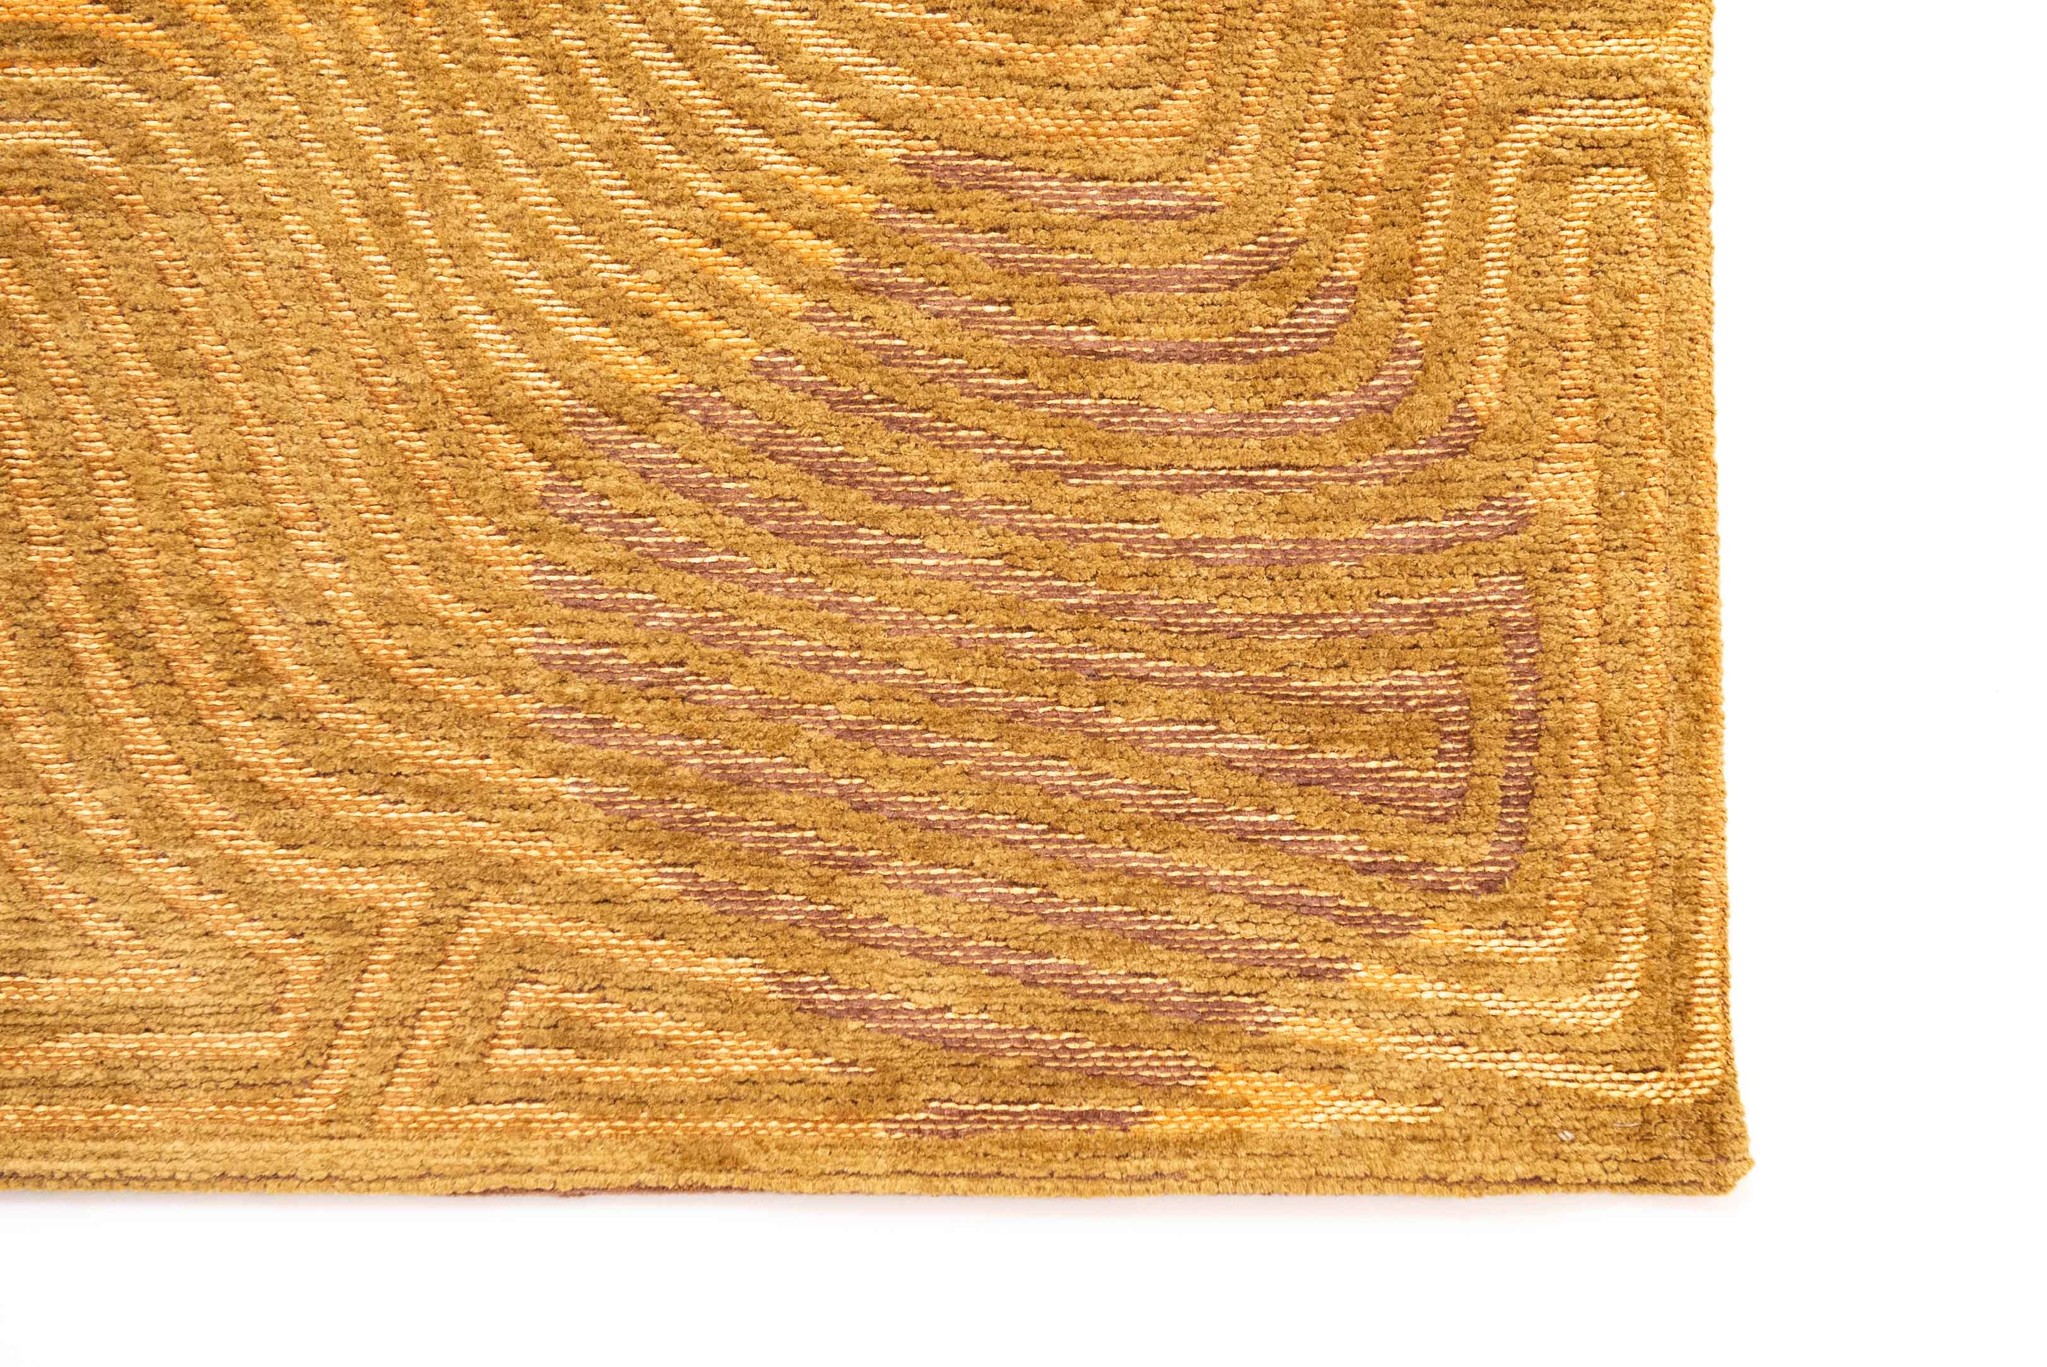 Gold Flatwoven Rug ☞ Size: 2' 7" x 8' 2" (80 x 250 cm)